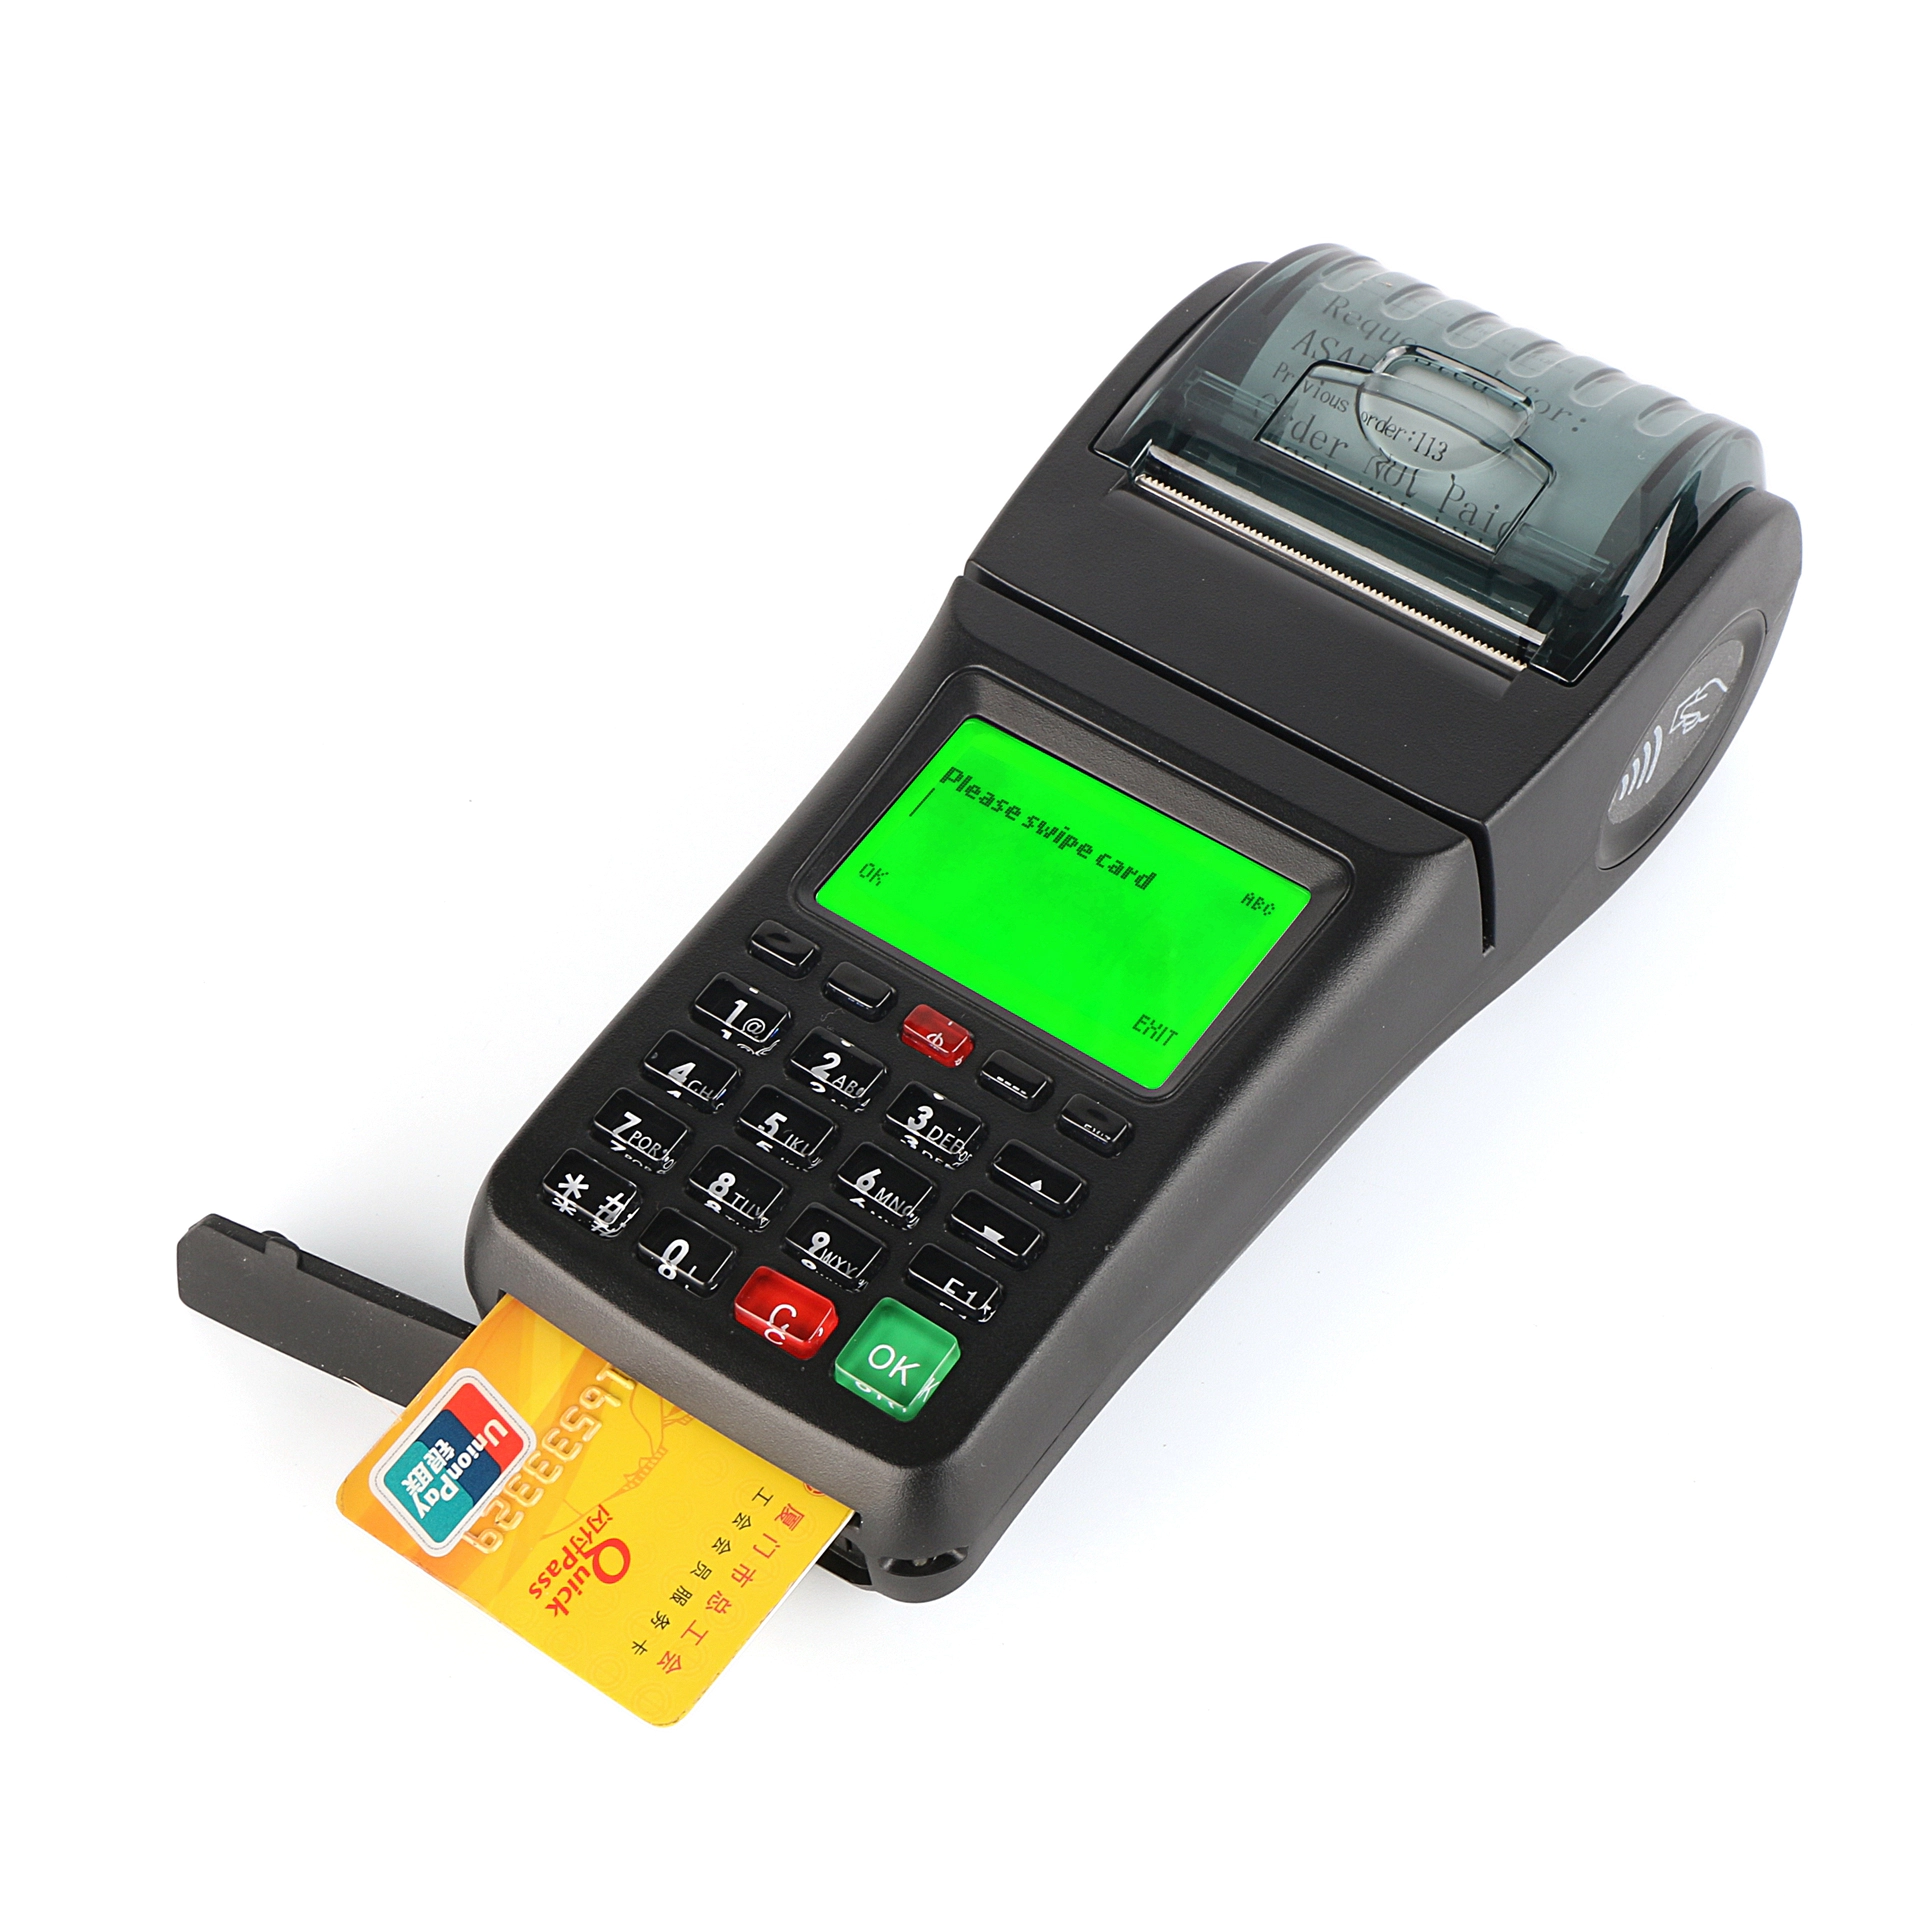 Handheld GPRS GSM NFC Magnetic Smart Card Reader POS Terminal with Sim Card